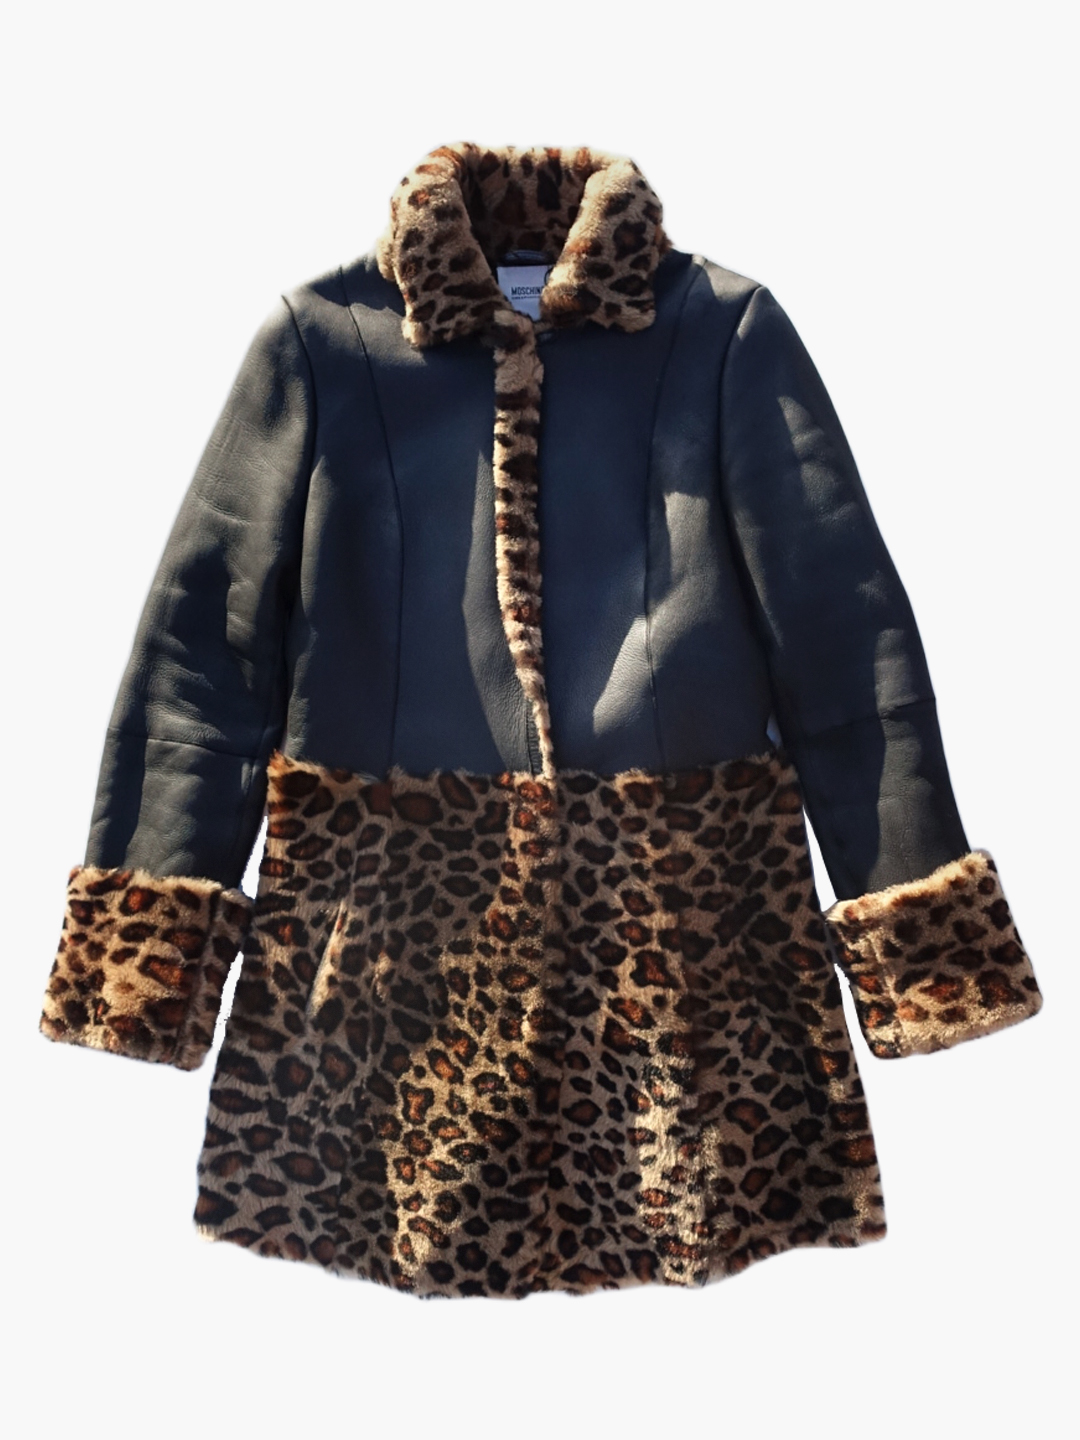 MOSCHINO CHEAP &amp; CHICSheep leather leopard coat